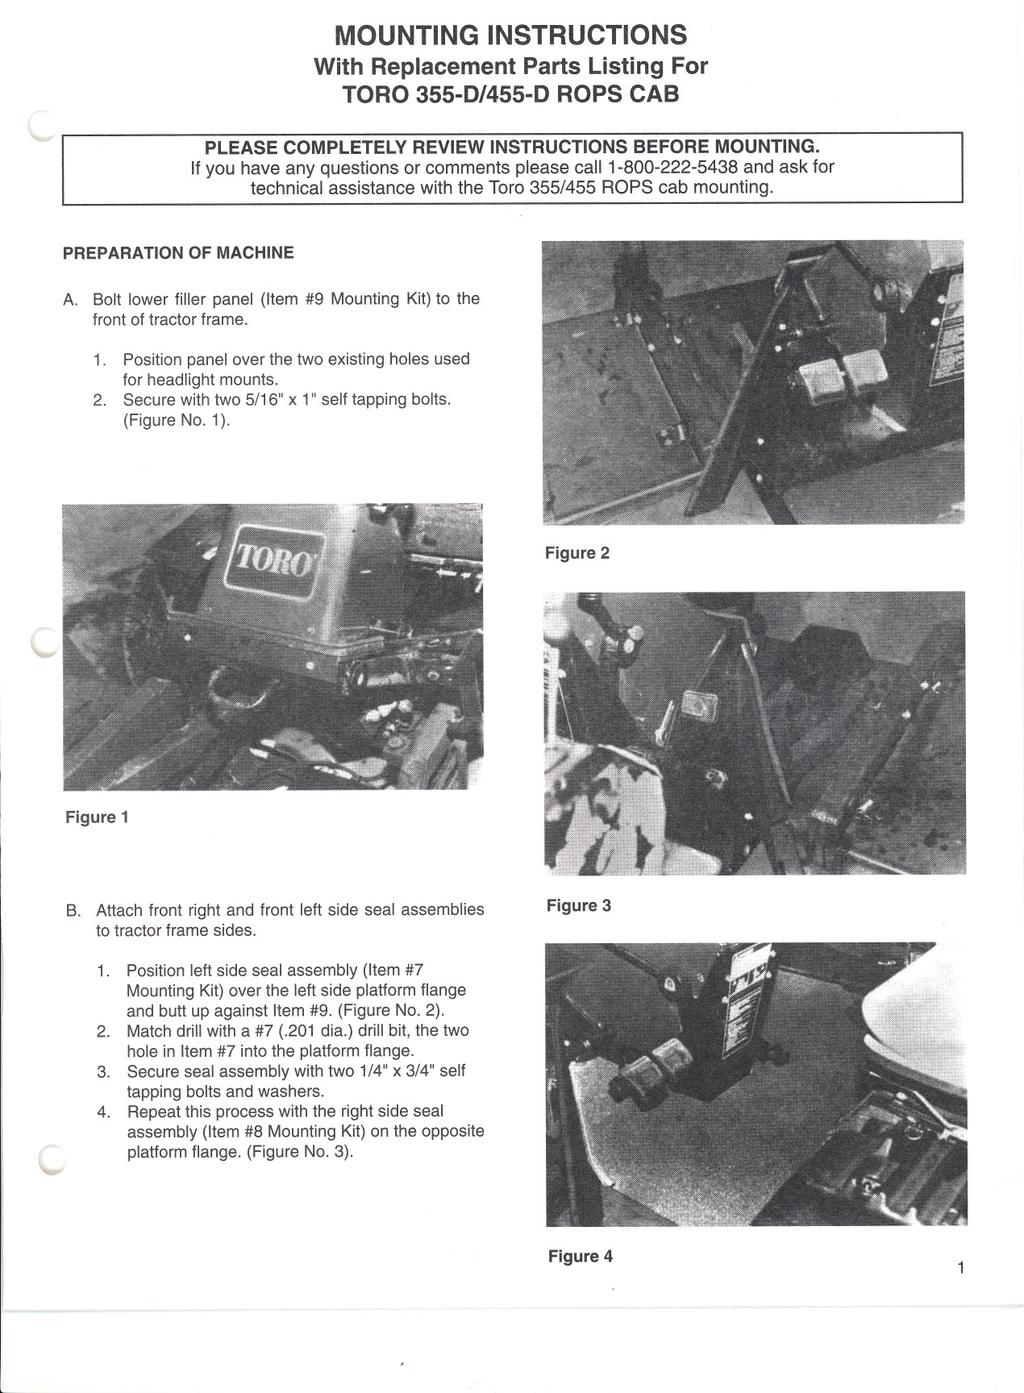 MOUNTING INSTRUCTIONS With Replacement Parts Listing For TORO 355-D/455-D ROPS CAB " " PLEASE COMPLETELY REVIEW INSTRUCTIONS BEFORE MOUNTING.